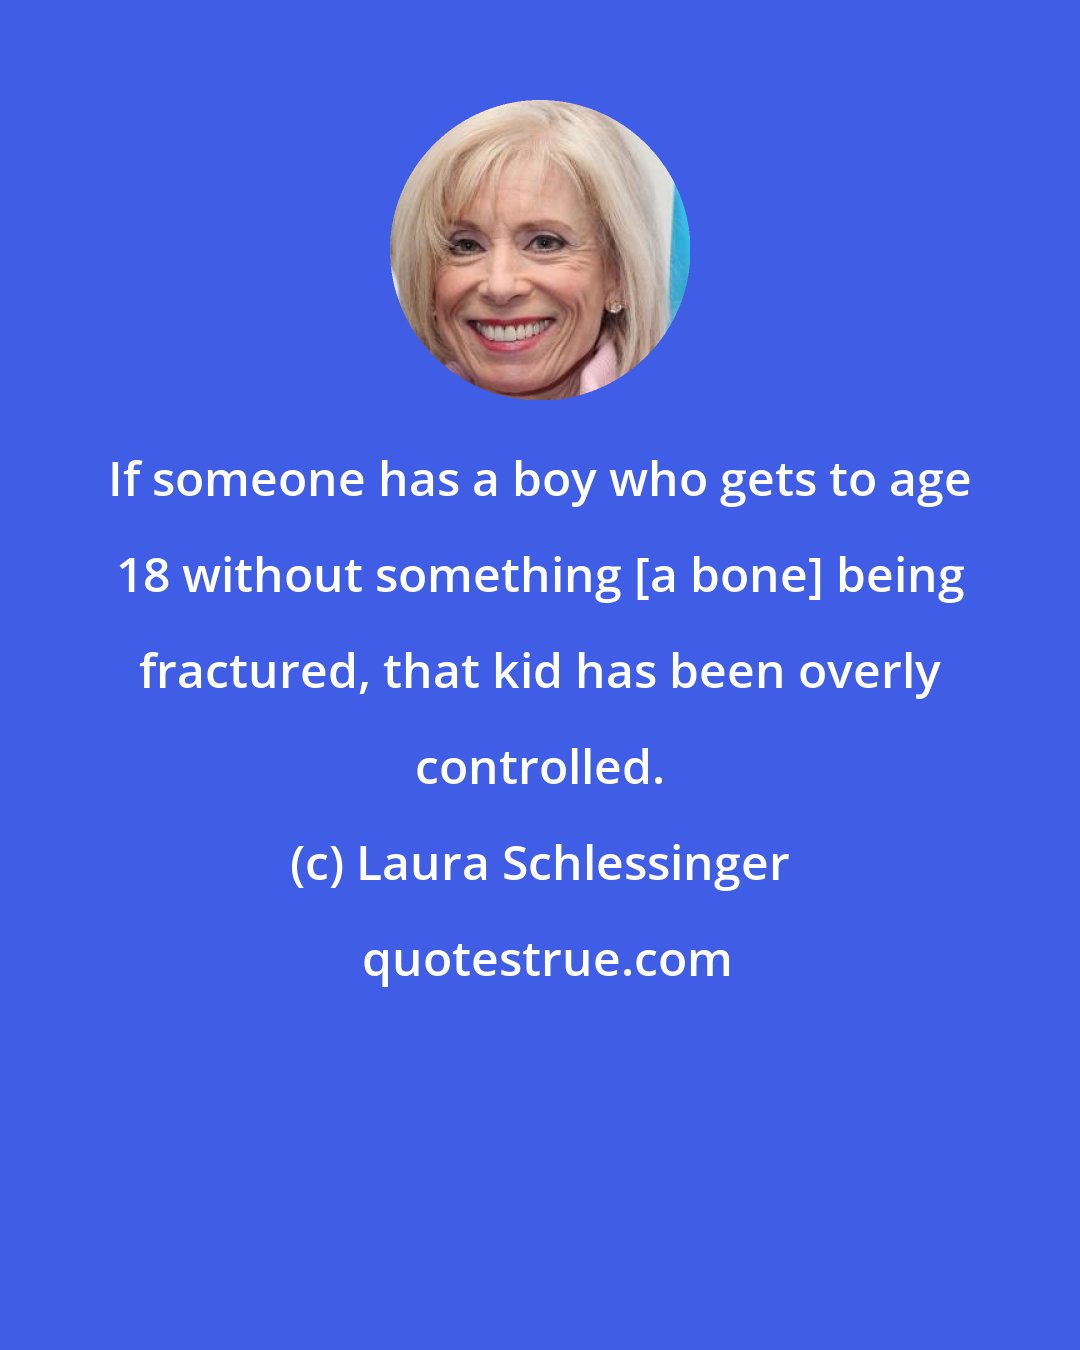 Laura Schlessinger: If someone has a boy who gets to age 18 without something [a bone] being fractured, that kid has been overly controlled.